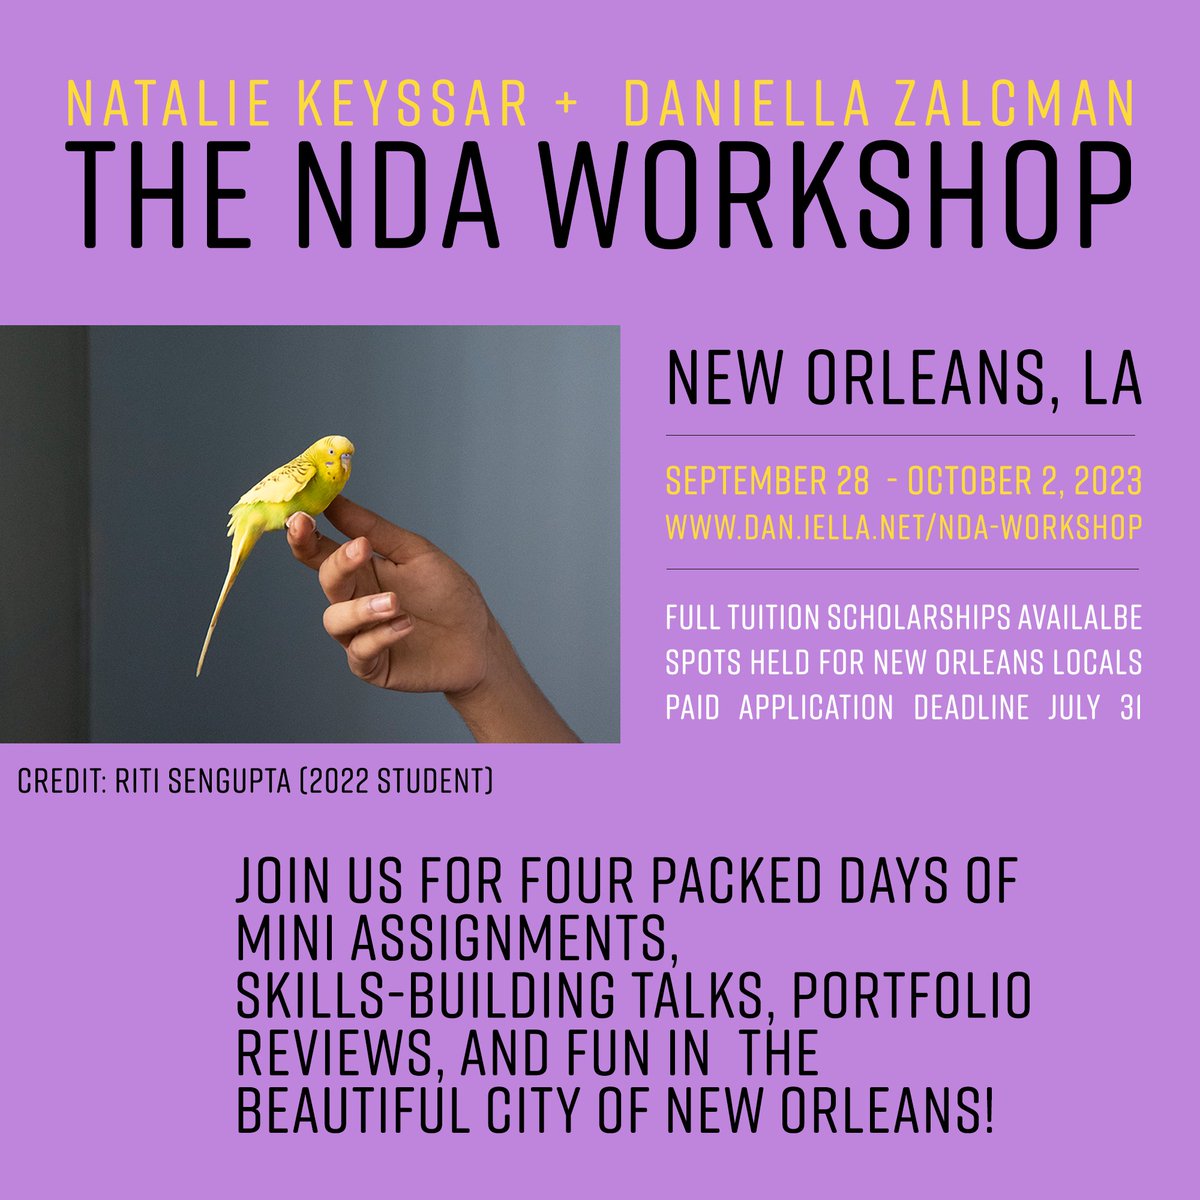 Just a couple weeks left to apply to join @nataliekeyssar's and my first ever in person workshop in New Orleans this fall! We already have some incredible opportunities lined up and can't wait to see you there. 🎉 dan.iella.net/nda-workshop